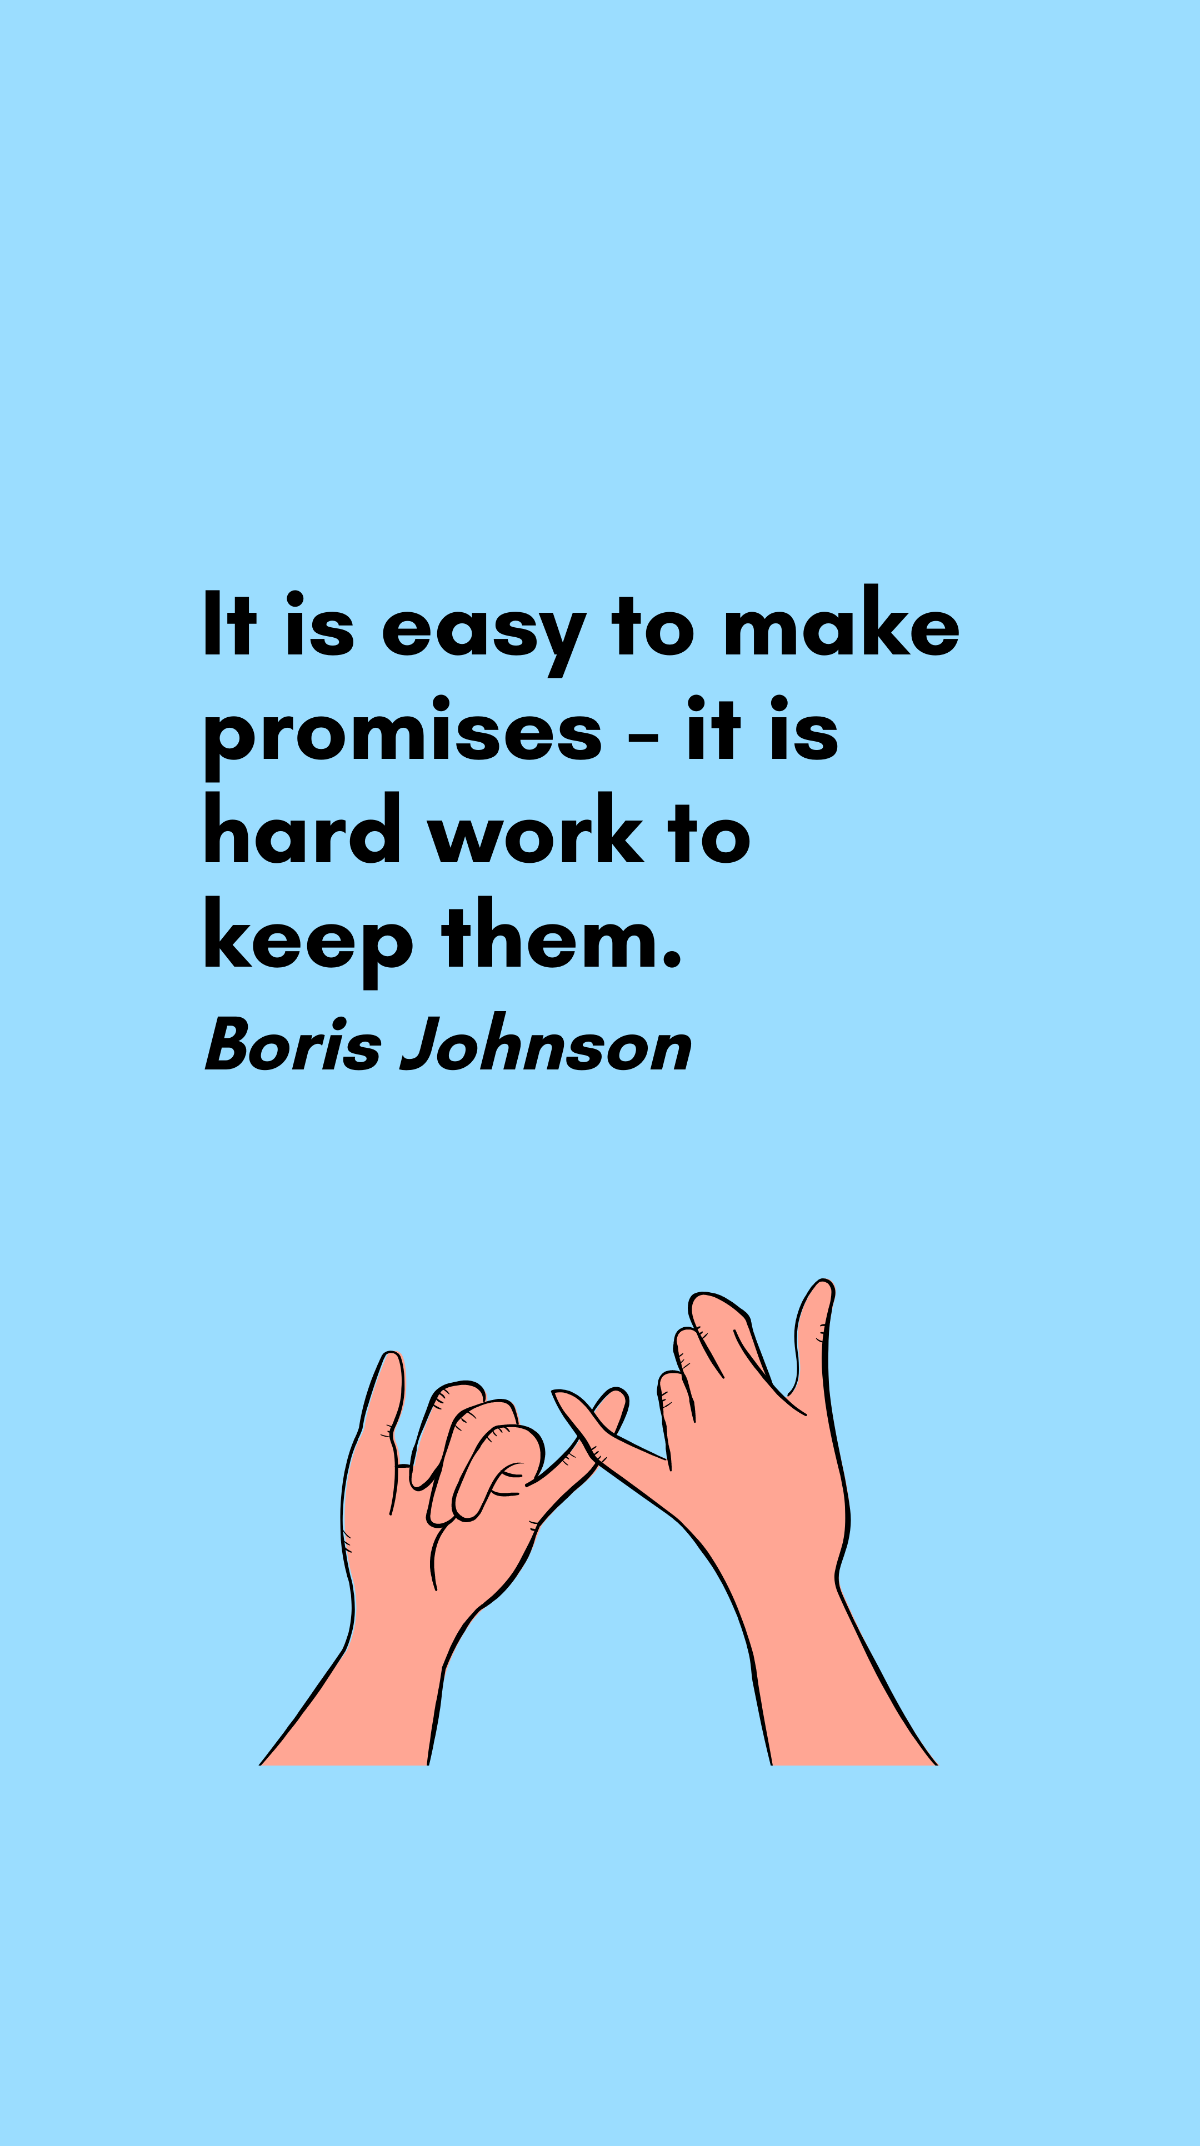 Free Boris Johnson - It is easy to make promises - it is hard work to keep them. Template